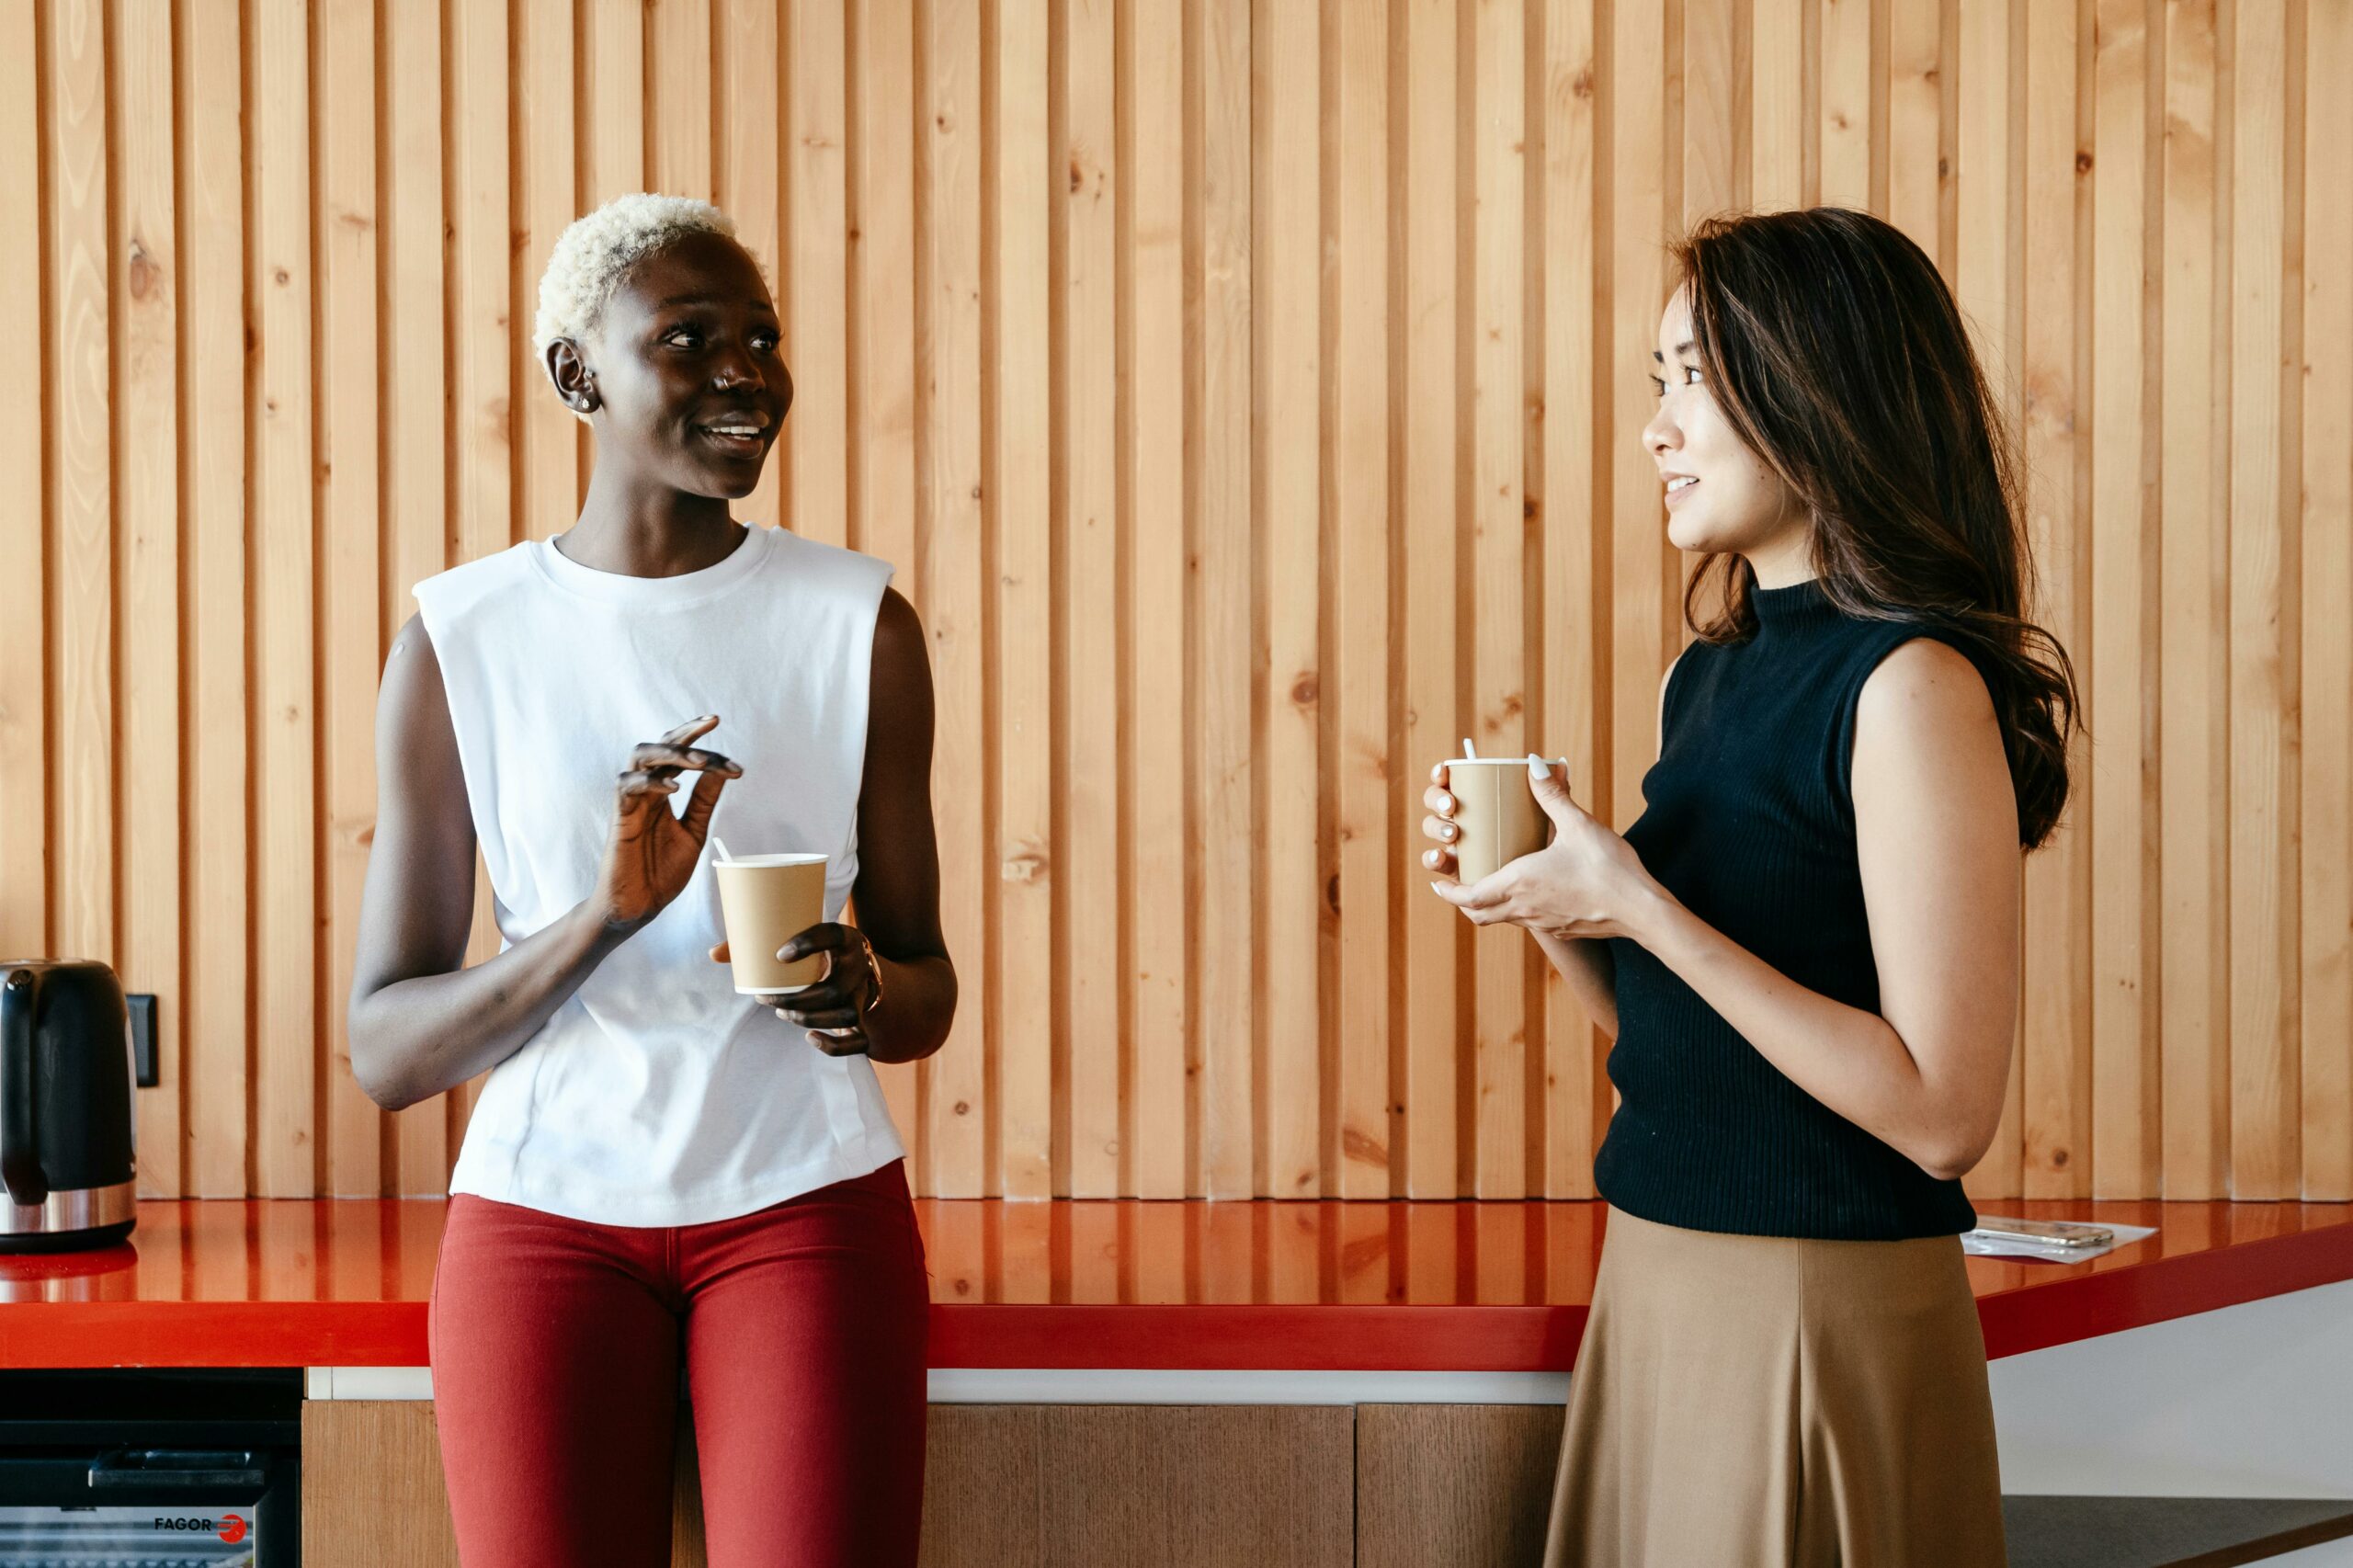 two women holding beverages talking and smiling